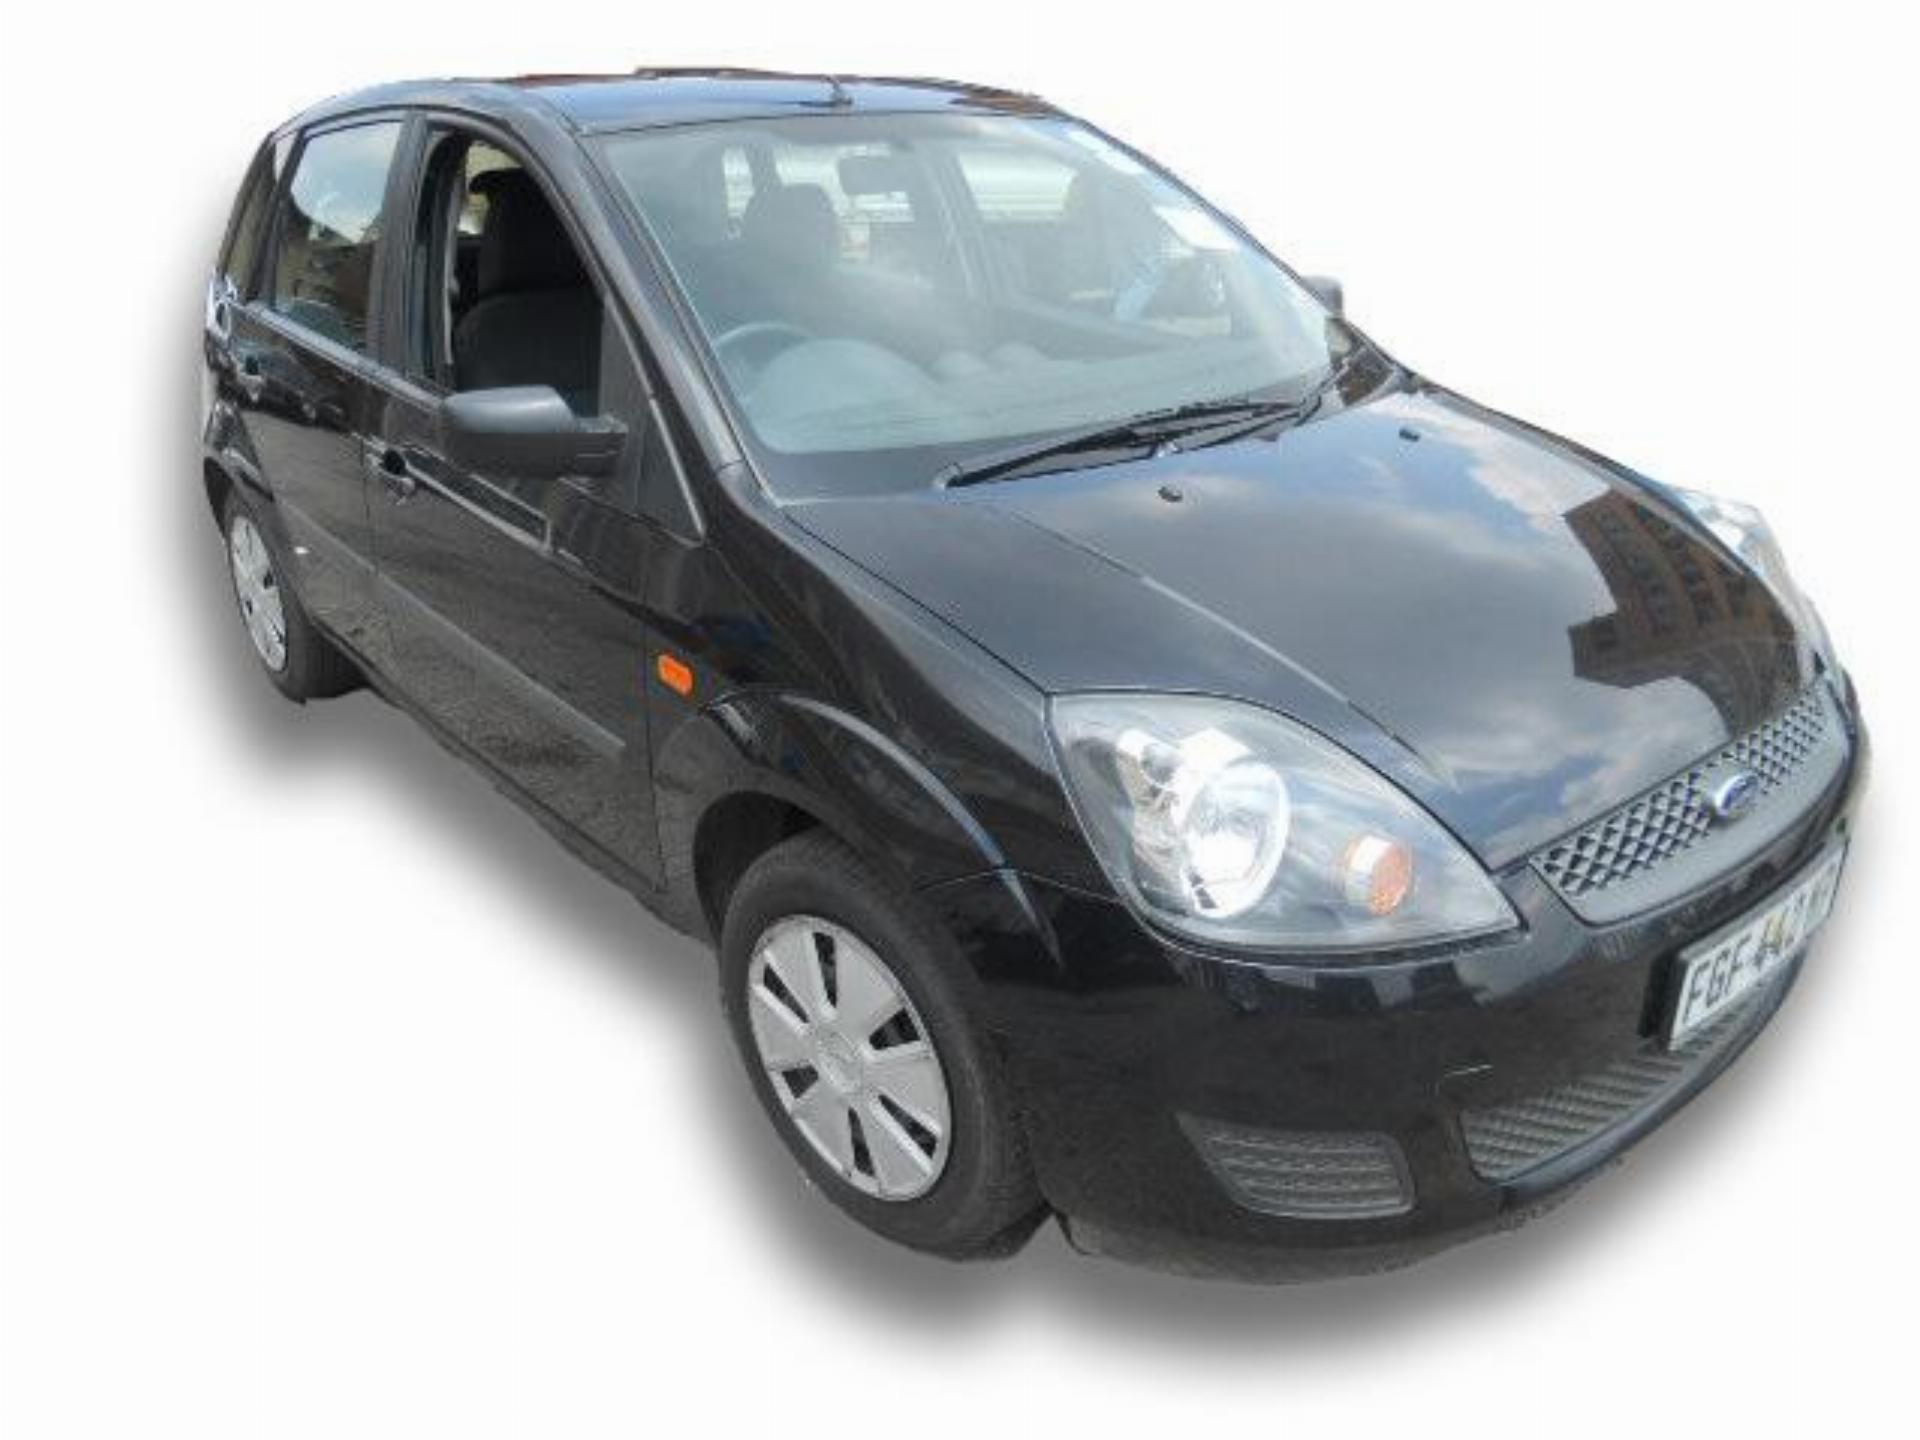 Ford Fiesta 1.4 Base 5DR